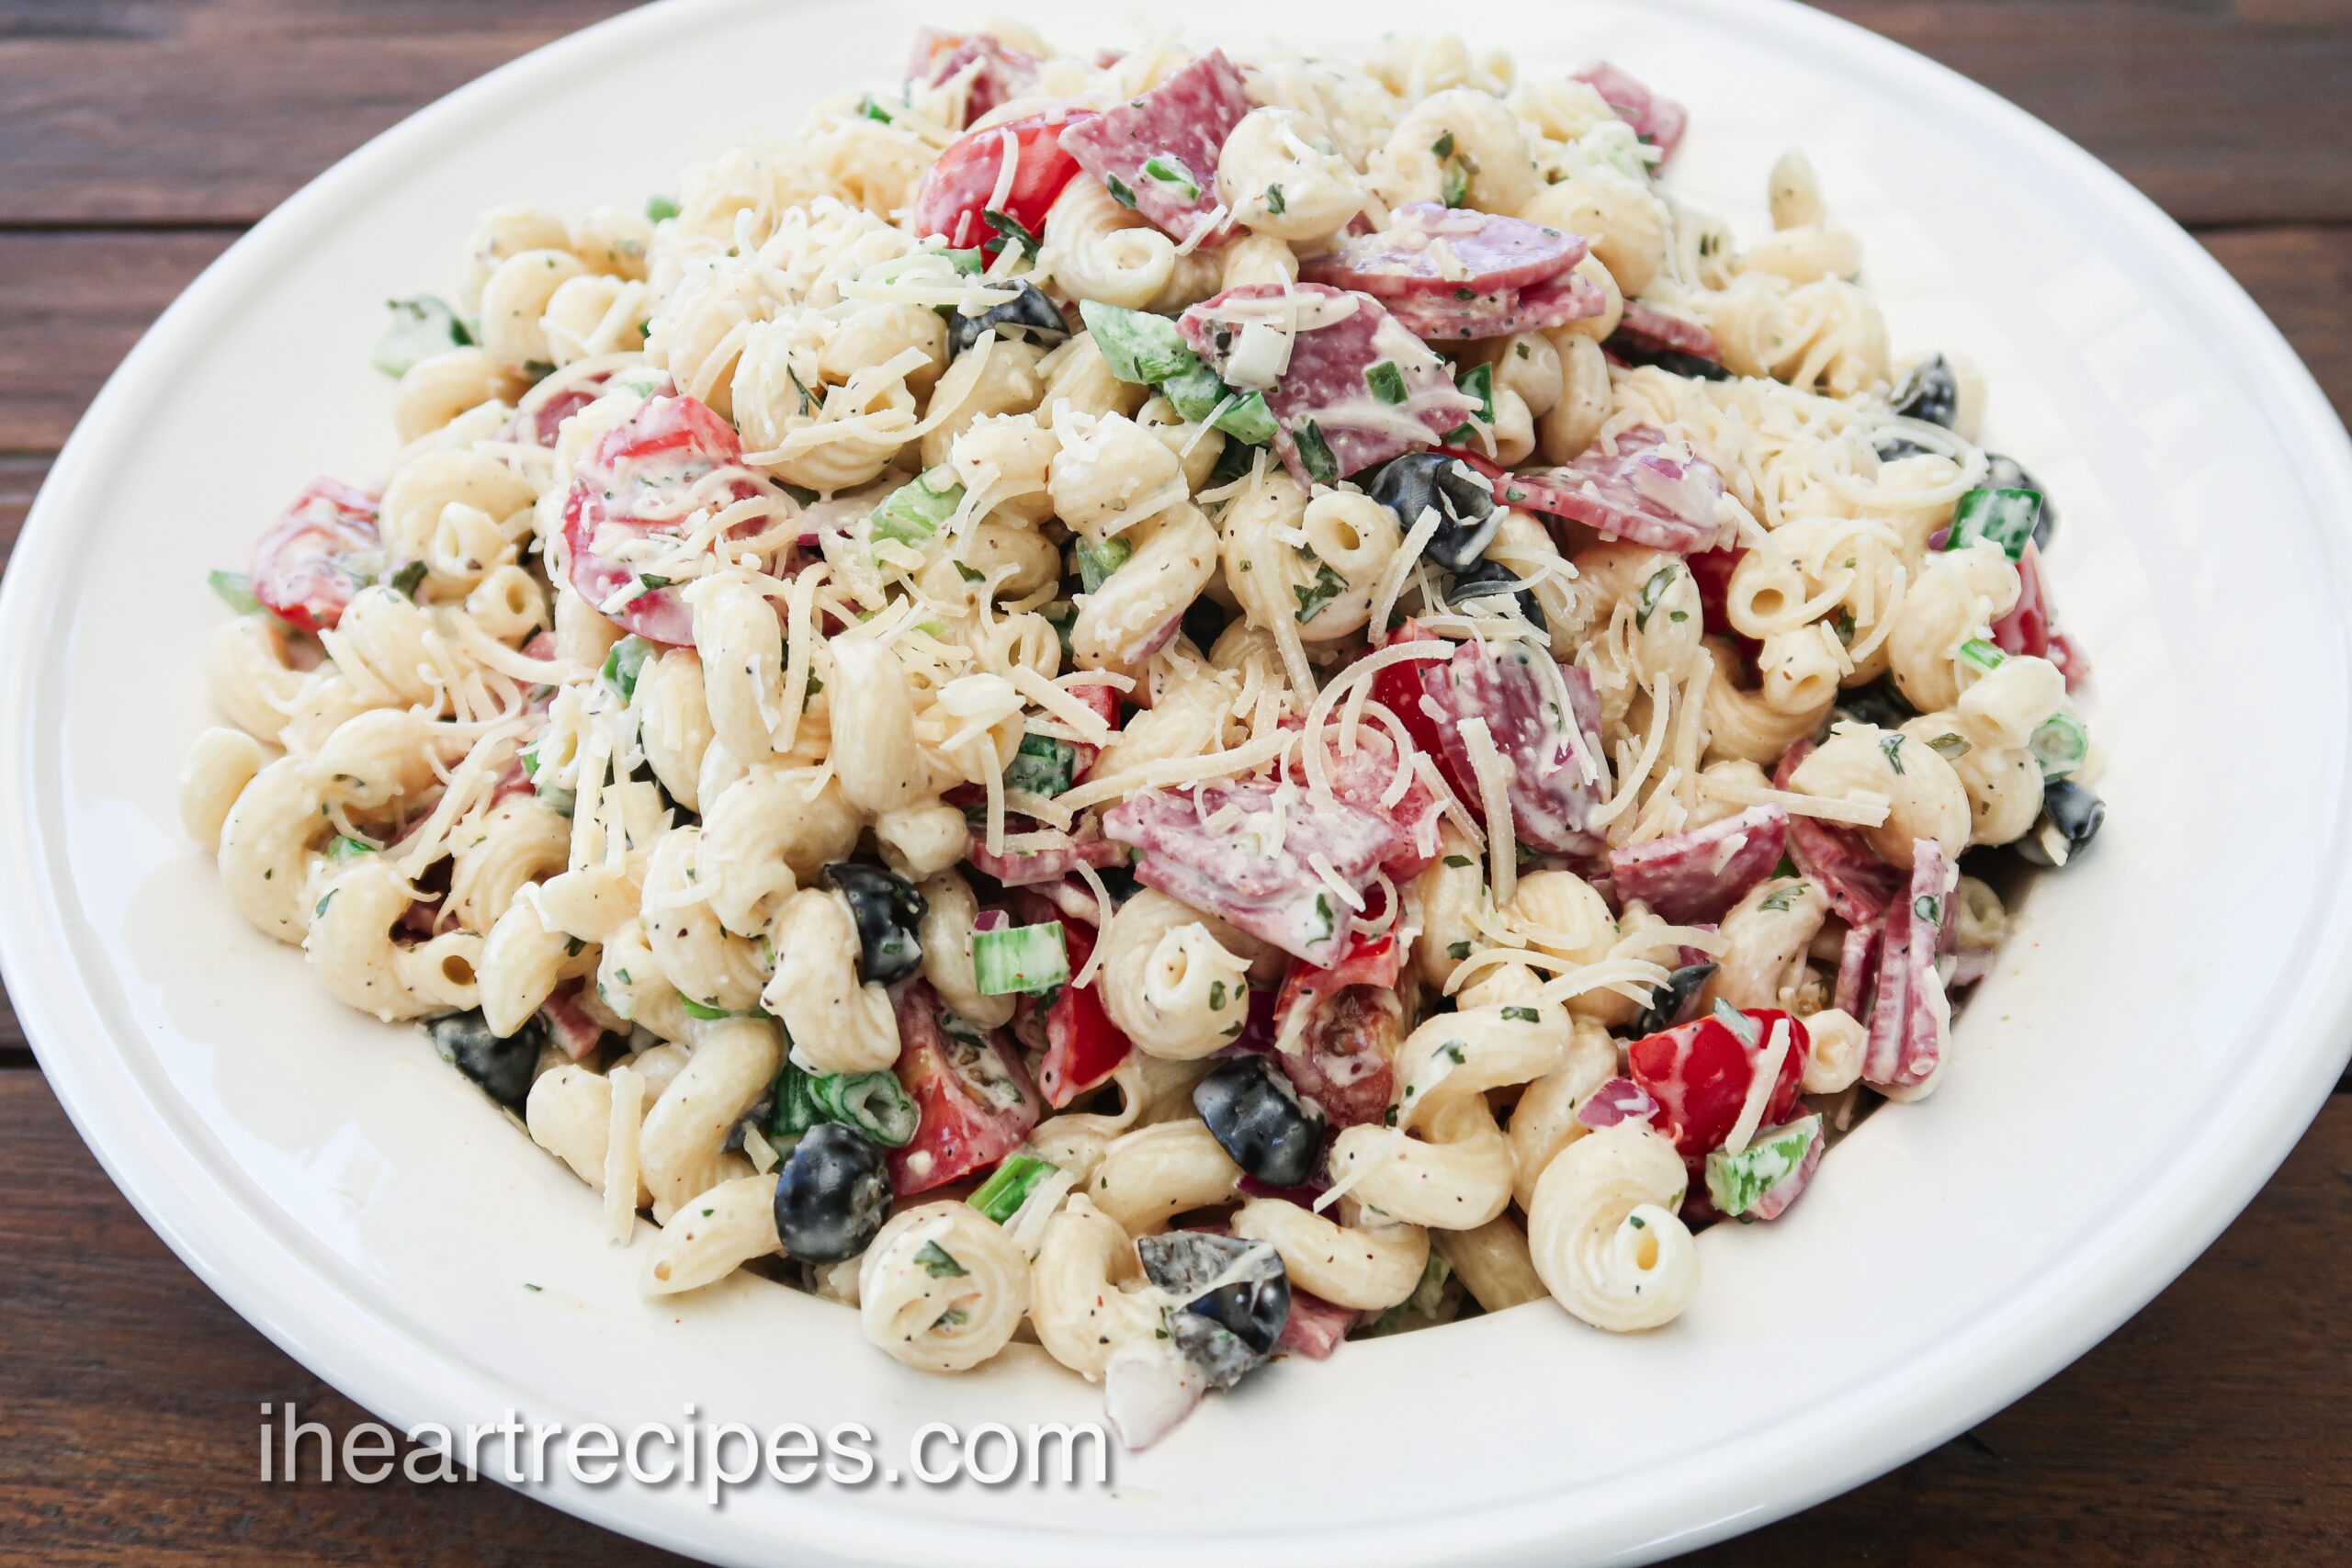 A large white bowl filled with Italian pasta salad—corkscrew pasta mixed with a creamy dressing, shredded cheese, chunks of salami, and colorful vegetables.